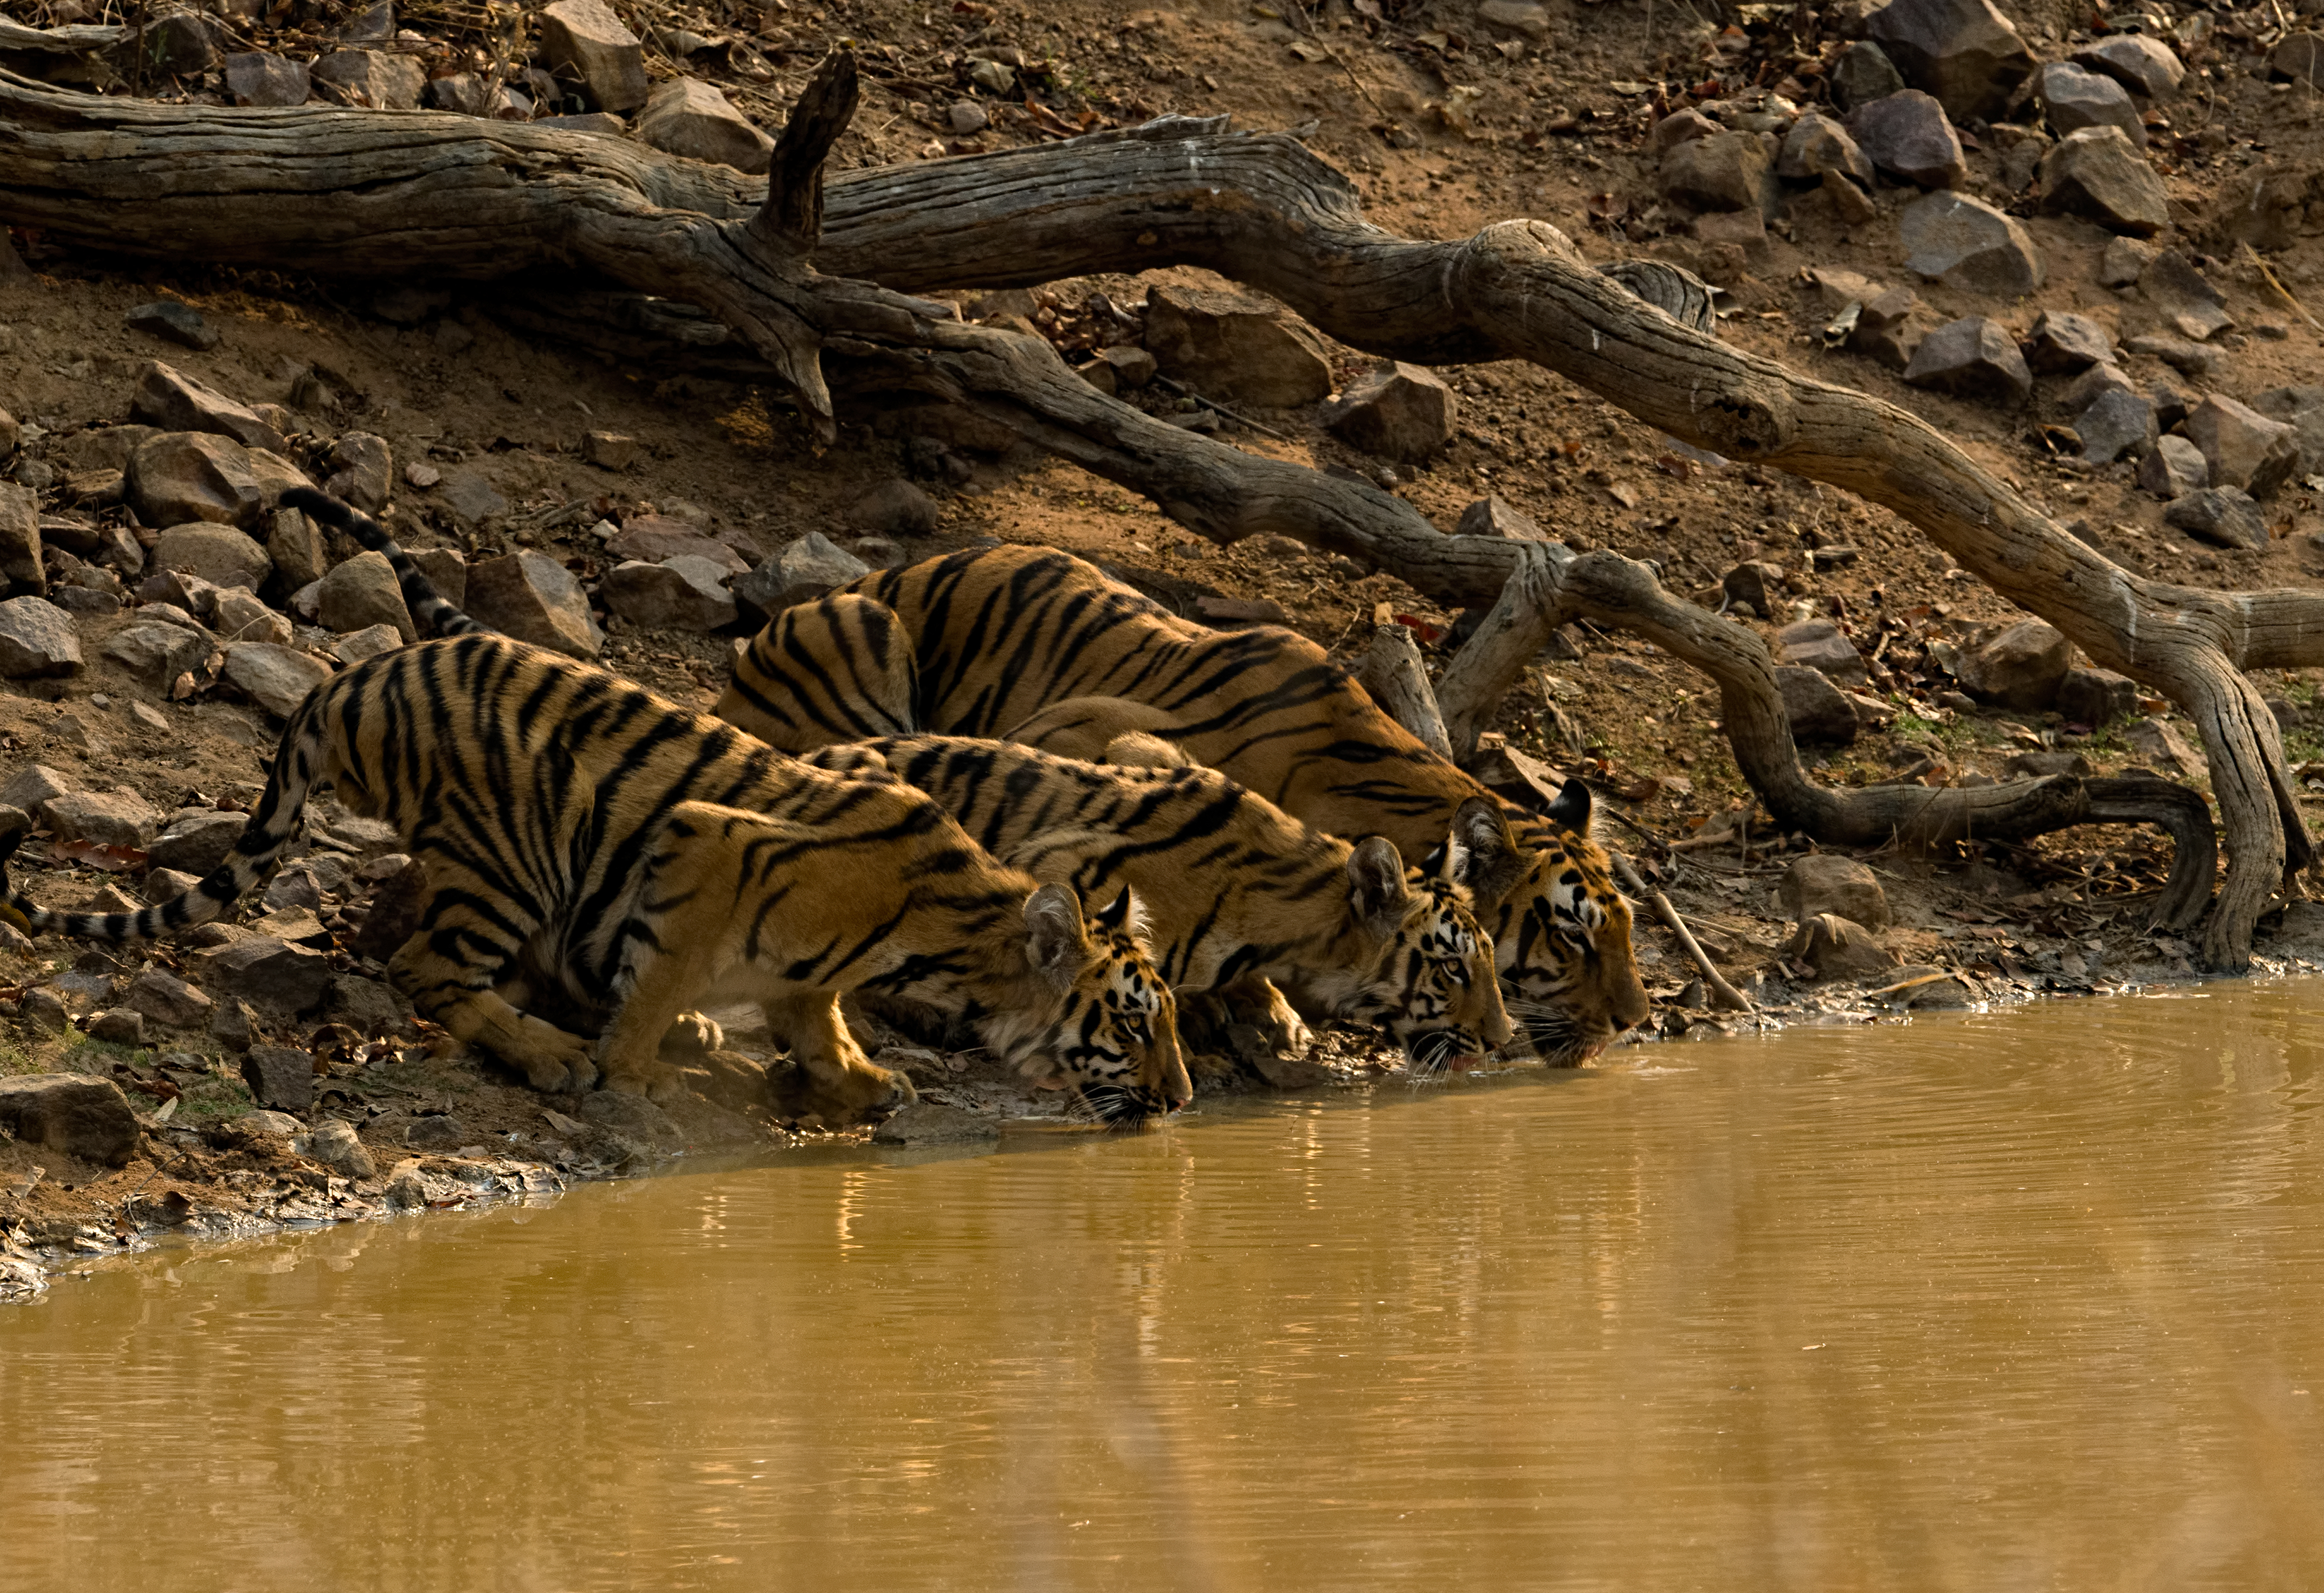 Three tiger cubs taking a drink along the bank of a river